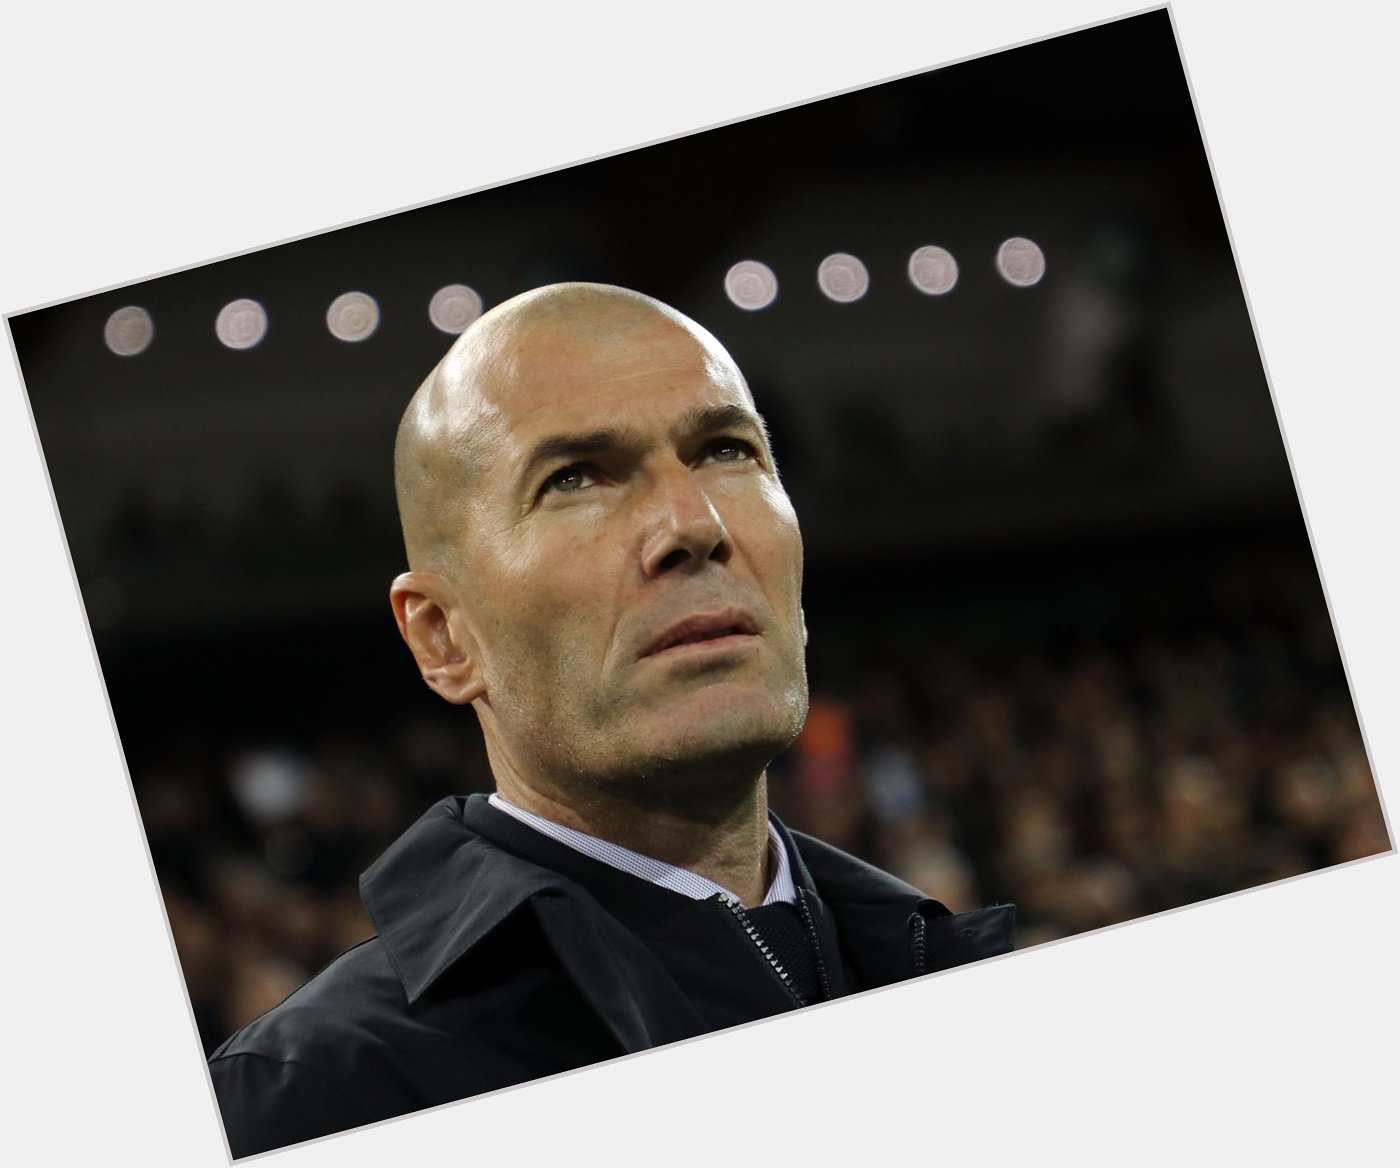 Happy birthday to the 3rd best manager of all time after Jose Mourinho and Carlo Ancelotti. LLL   Zizou  